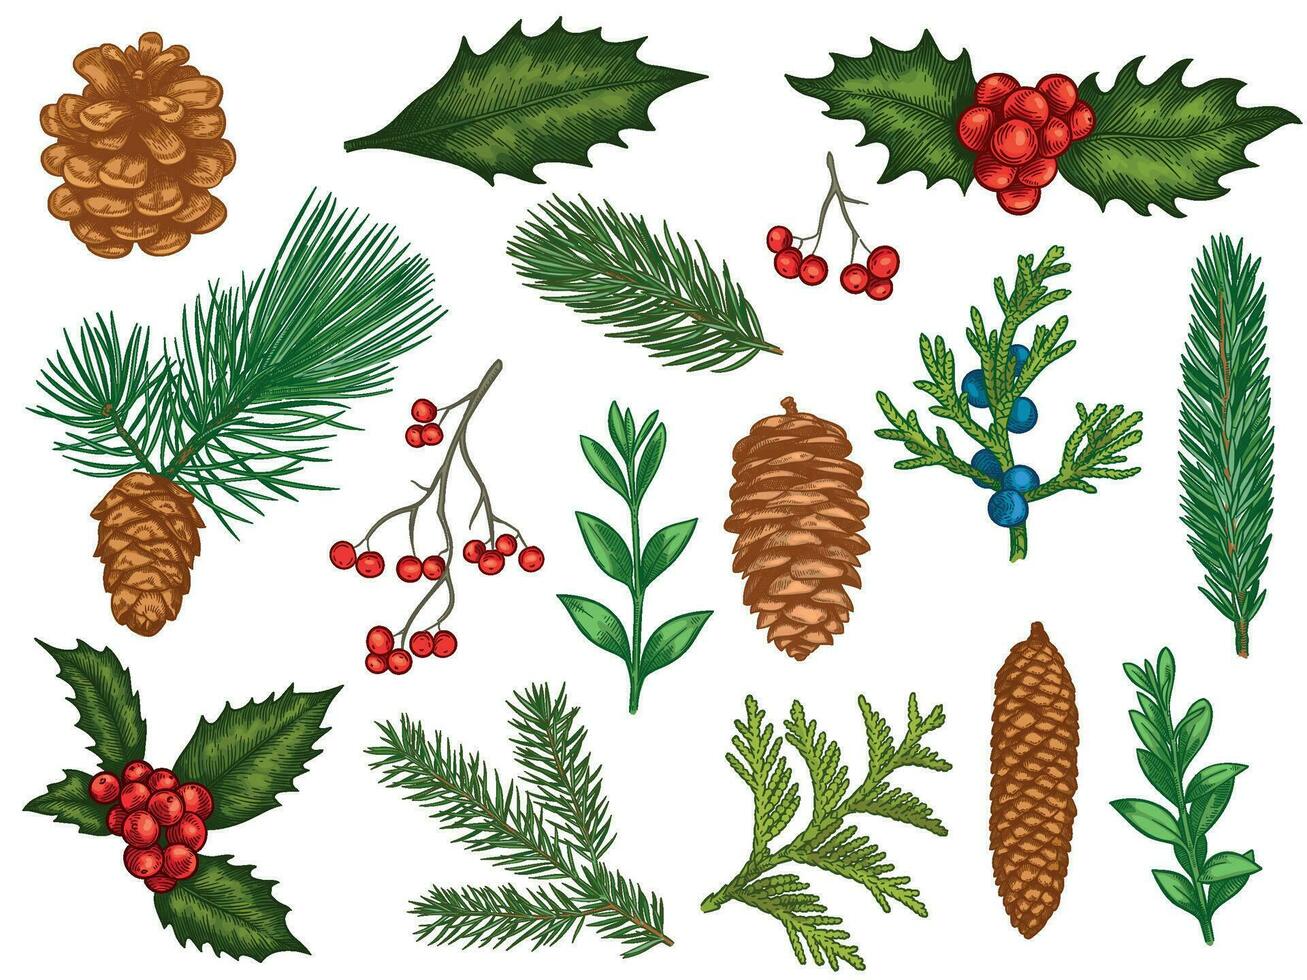 Xmas floral. Flower christmas winter decorations, red poinsettia, mistletoe, holly leaves with berries, fir branches, pine cones vector set